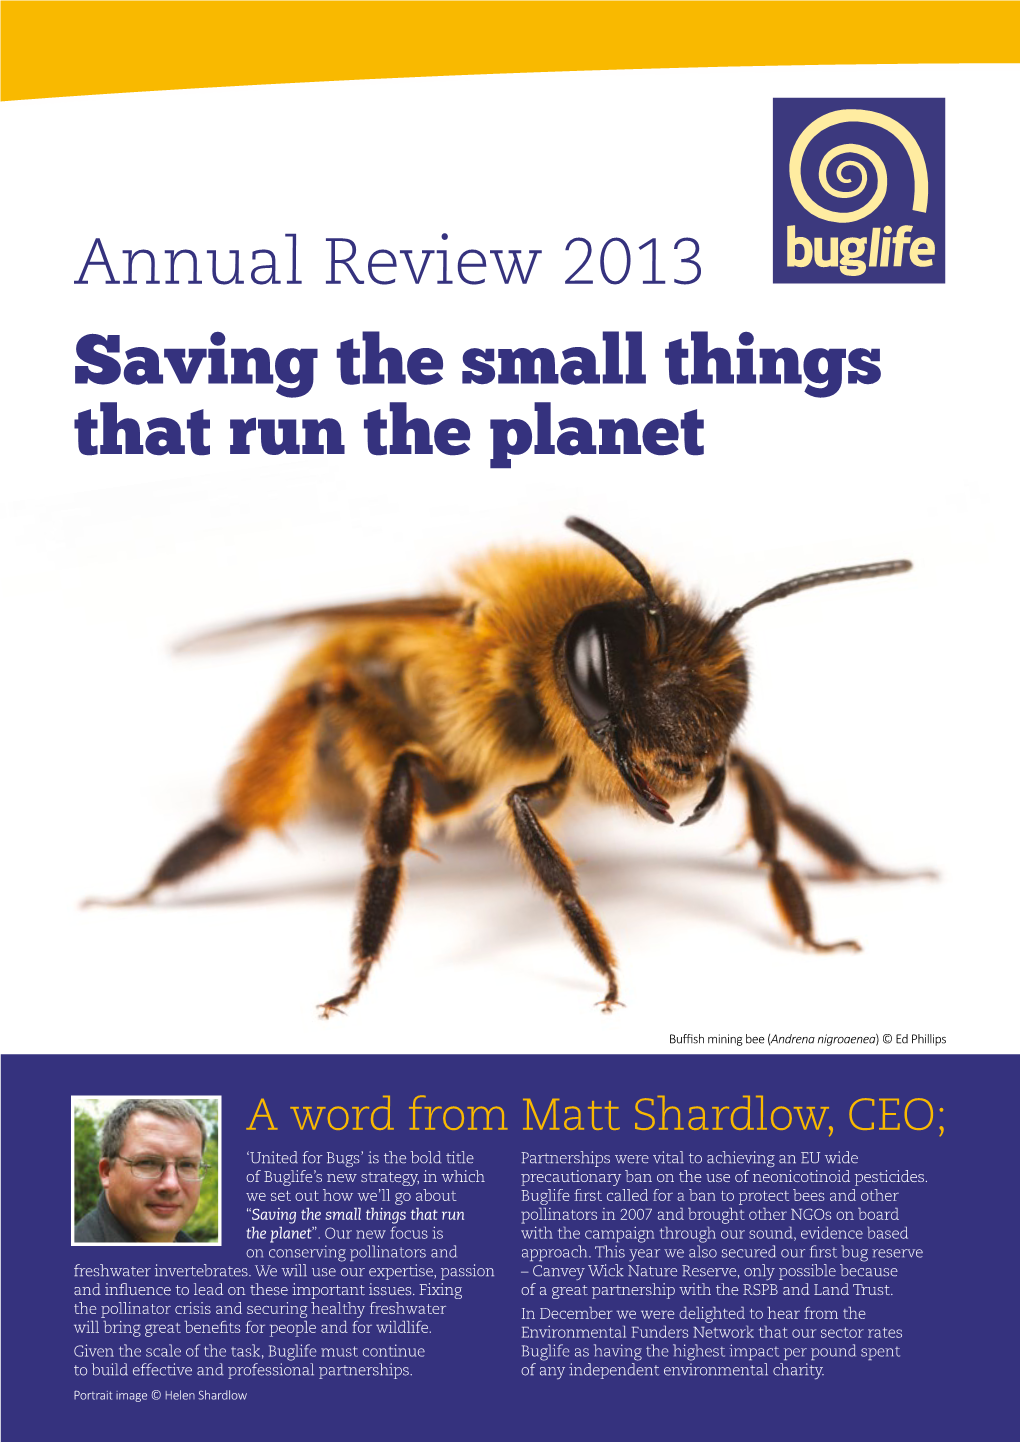 Annual Review 2013 Saving the Small Things That Run the Planet